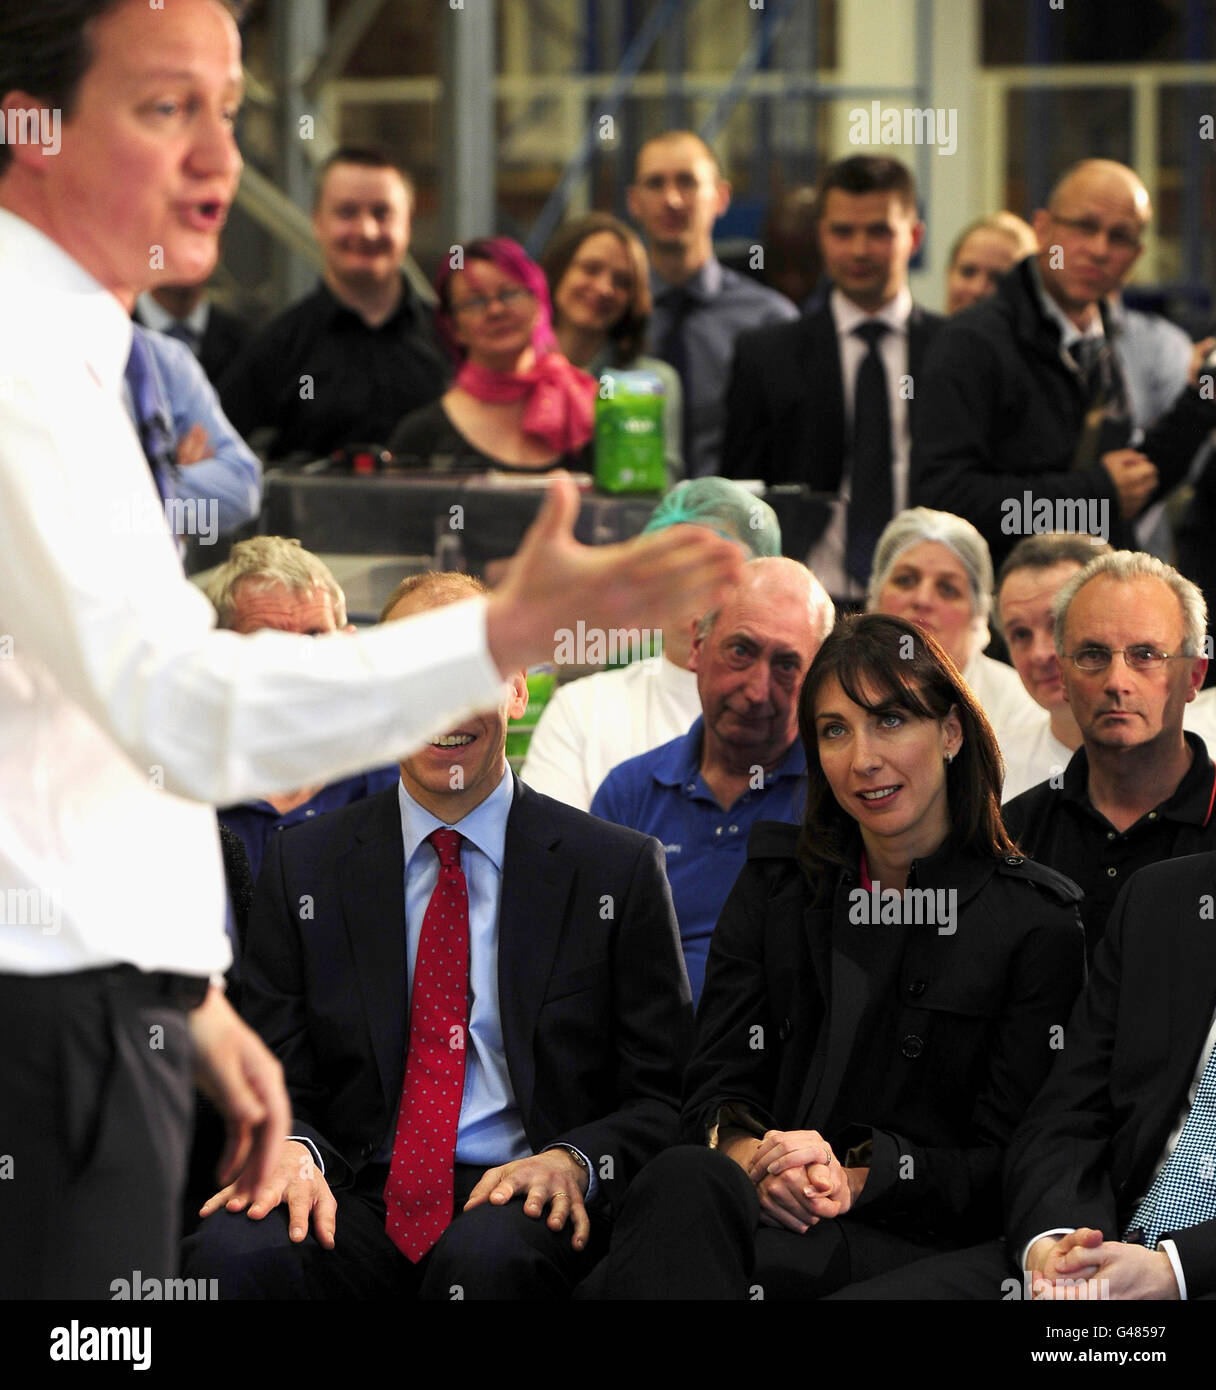 Prime Minister David Cameron speaks during a PM Direct question and answer session, as wife Samantha looks on, at tea and coffee merchants, Taylors of Harrogate in North Yorkshire. Stock Photo